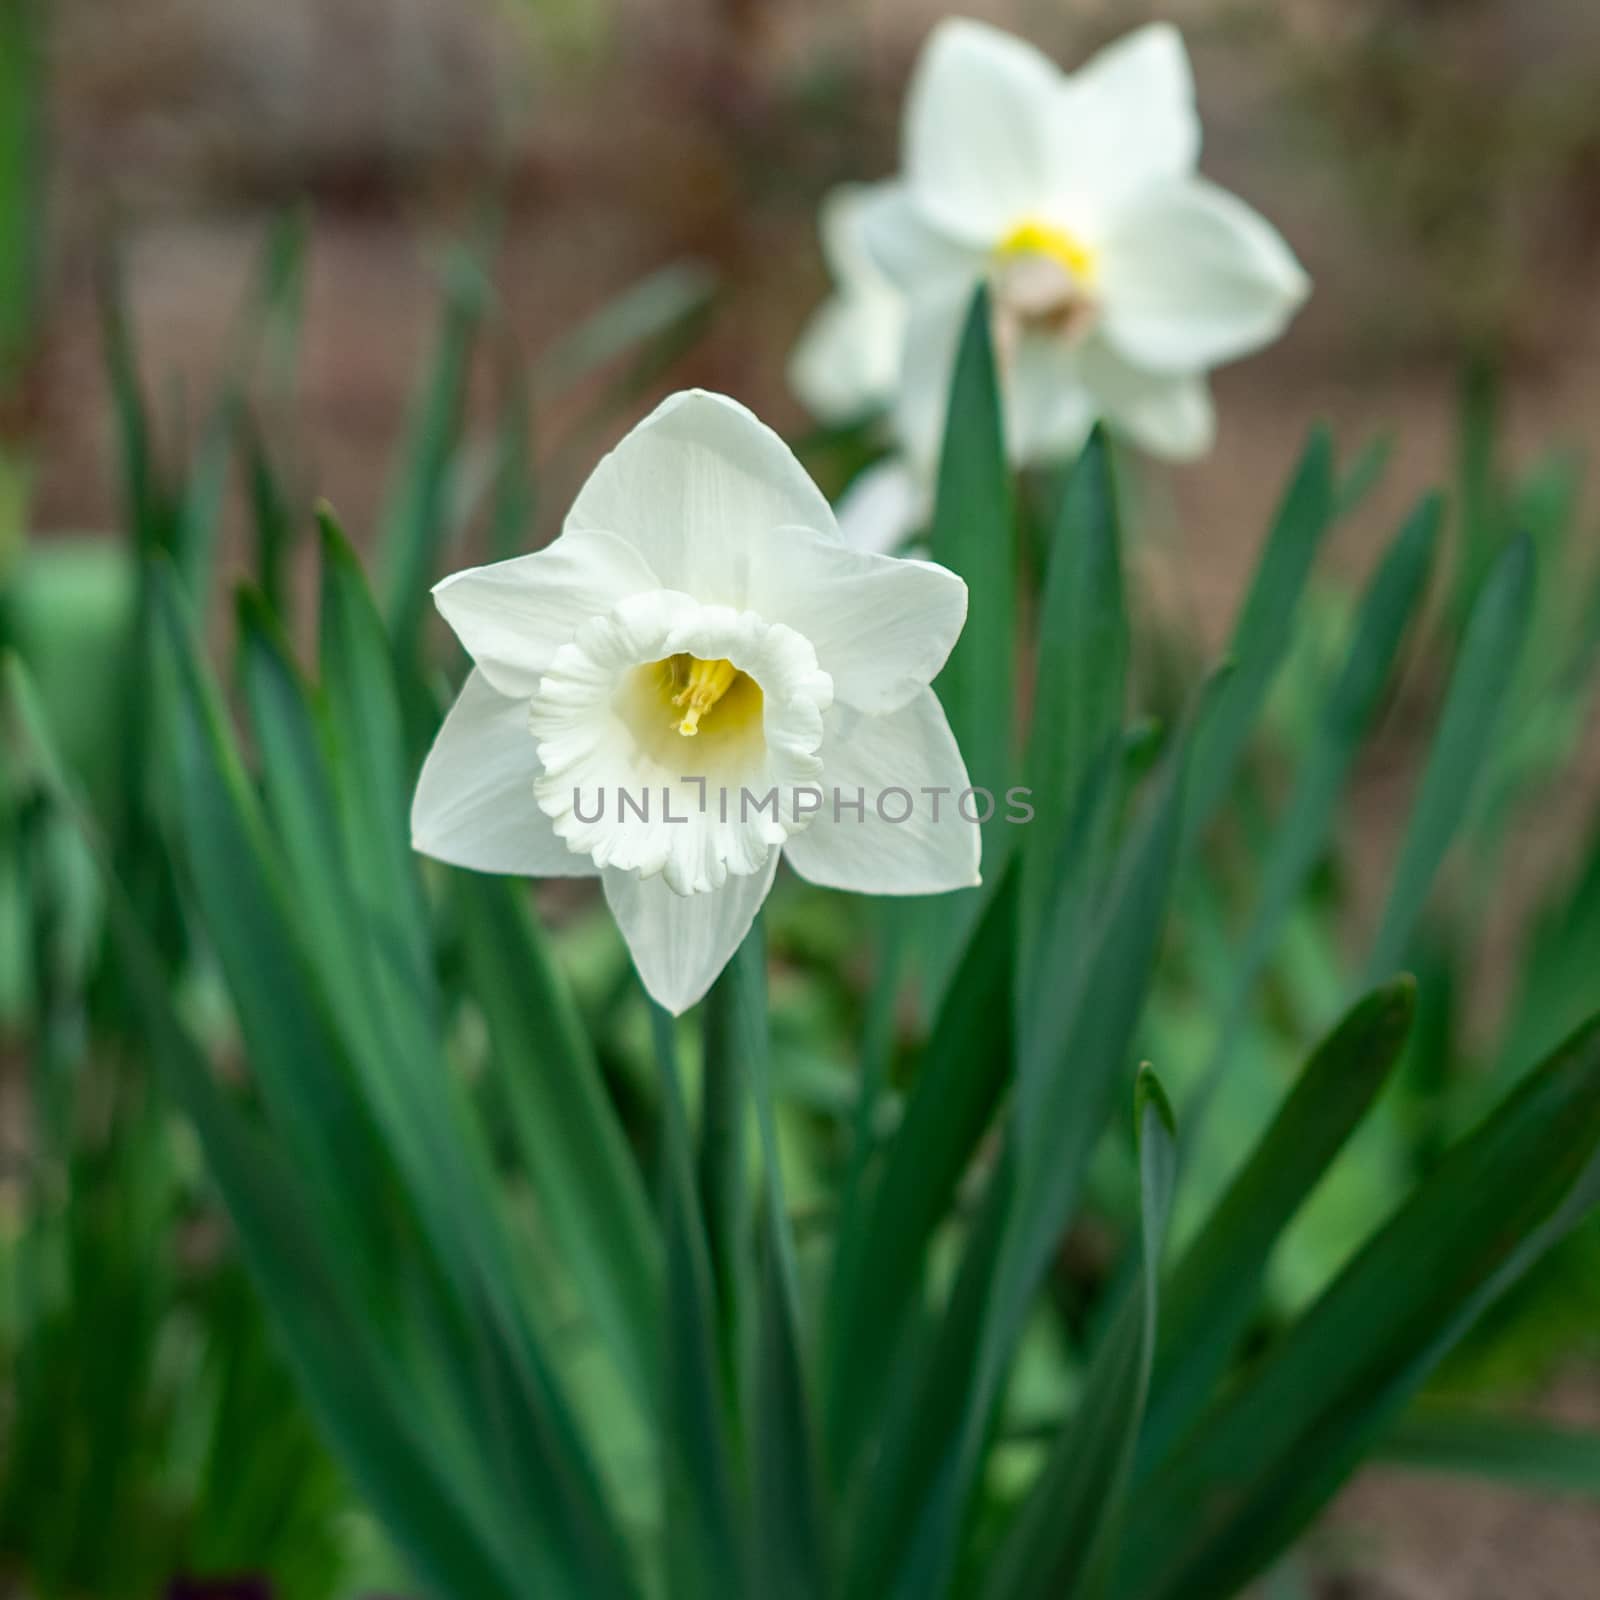 Narcissus tubular white delicate flower with a thin stem and exquisite aroma by Serhii_Voroshchuk